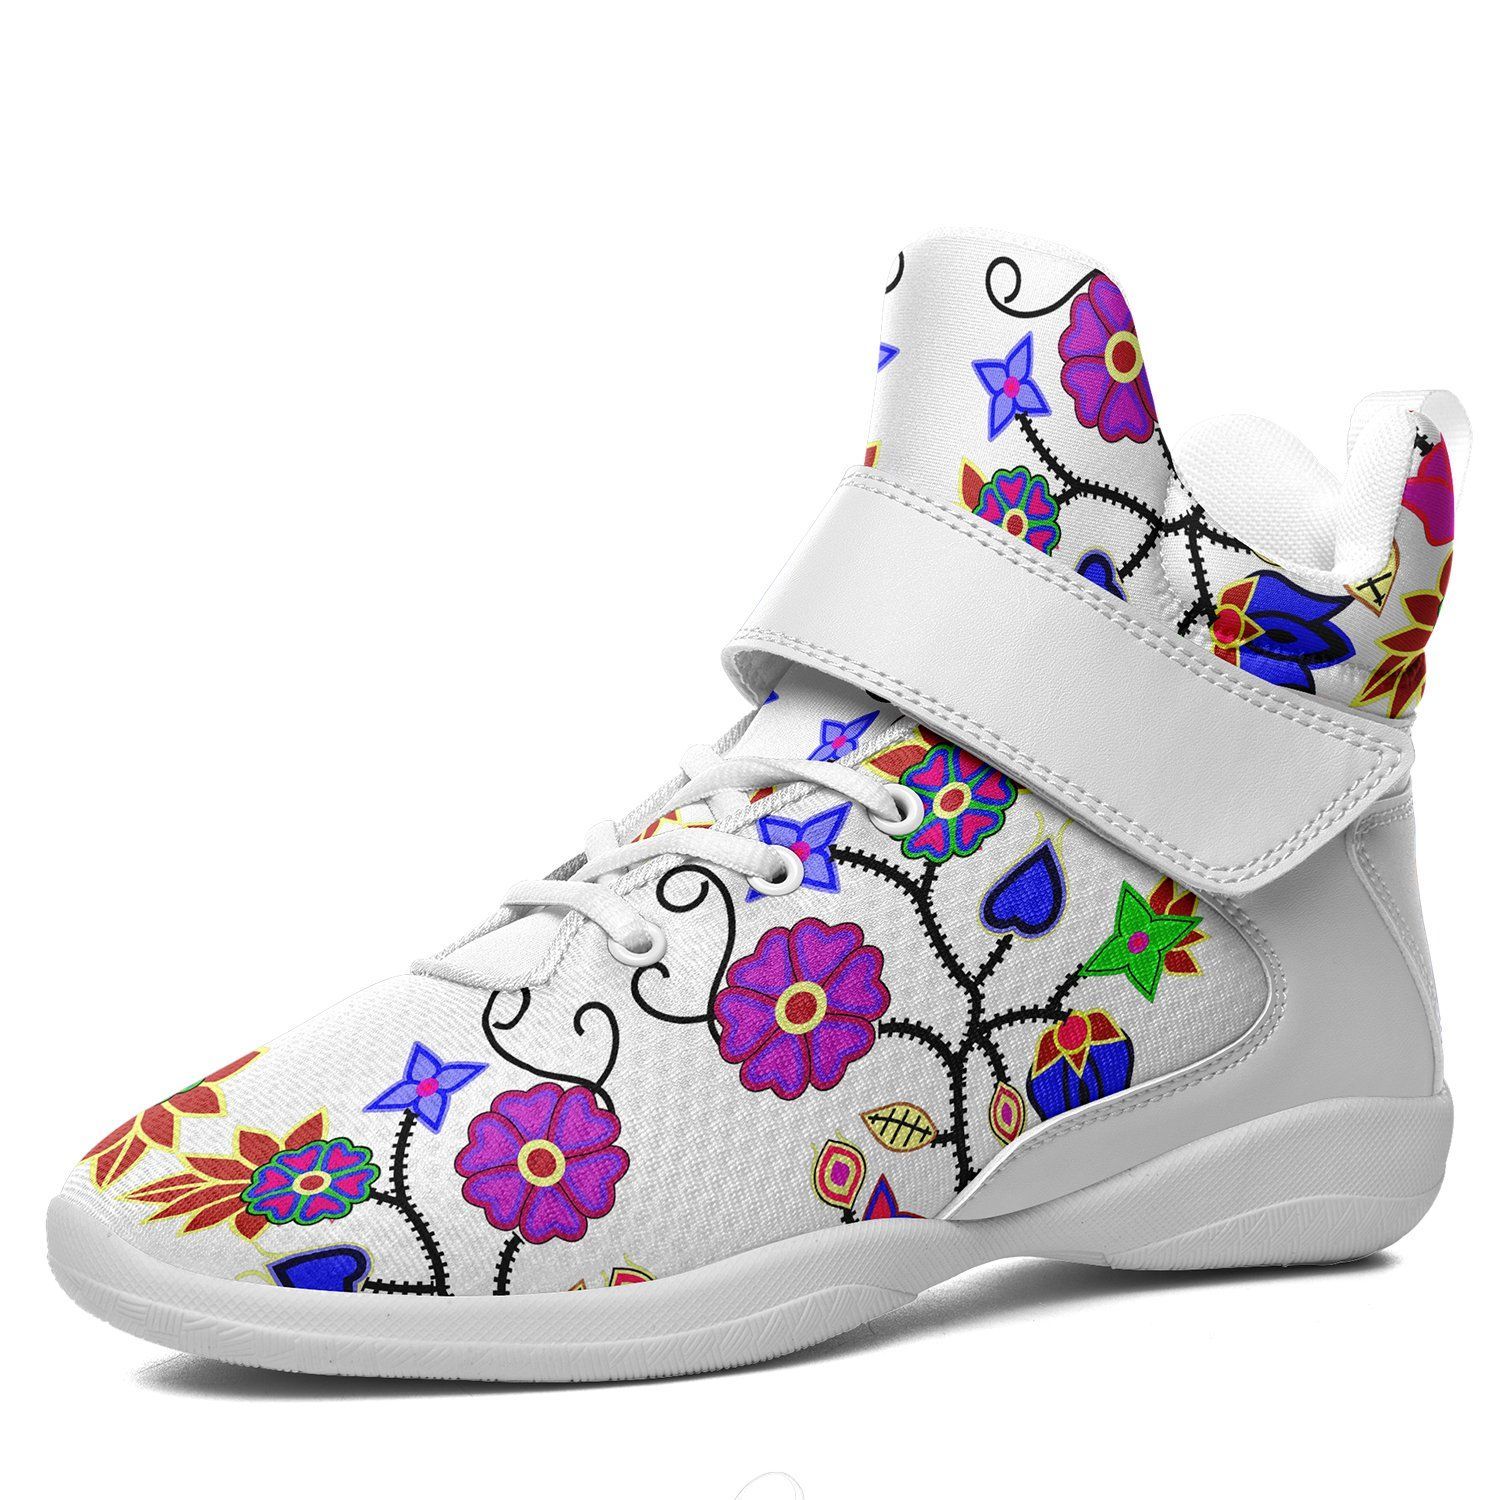 Floral Beadwork Seven Clans White Ipottaa Basketball / Sport High Top Shoes - White Sole 49 Dzine US Men 7 / EUR 40 White Sole with White Strap 